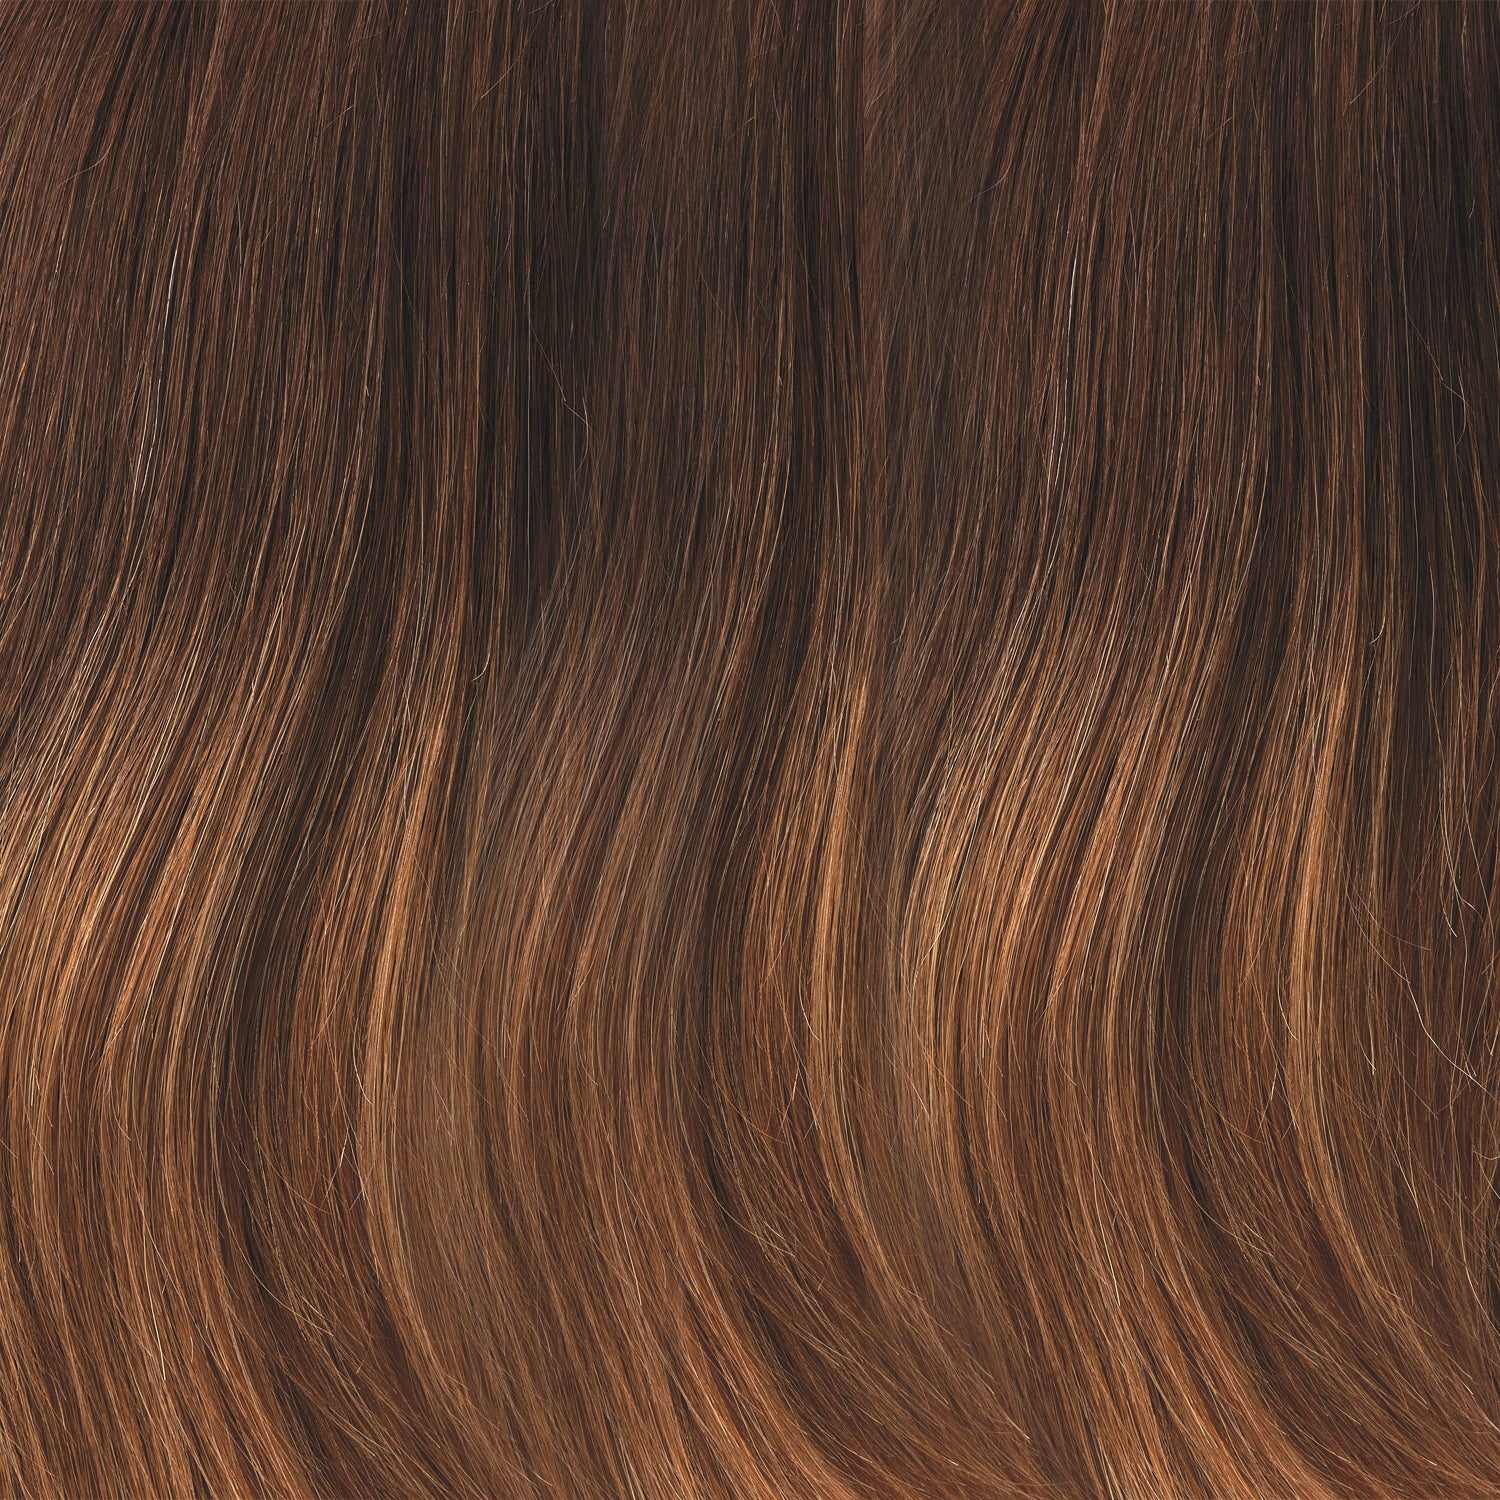 B8/2730RO medium brown rooots to midlengths medium red-gold blonde midlelenghts to ends